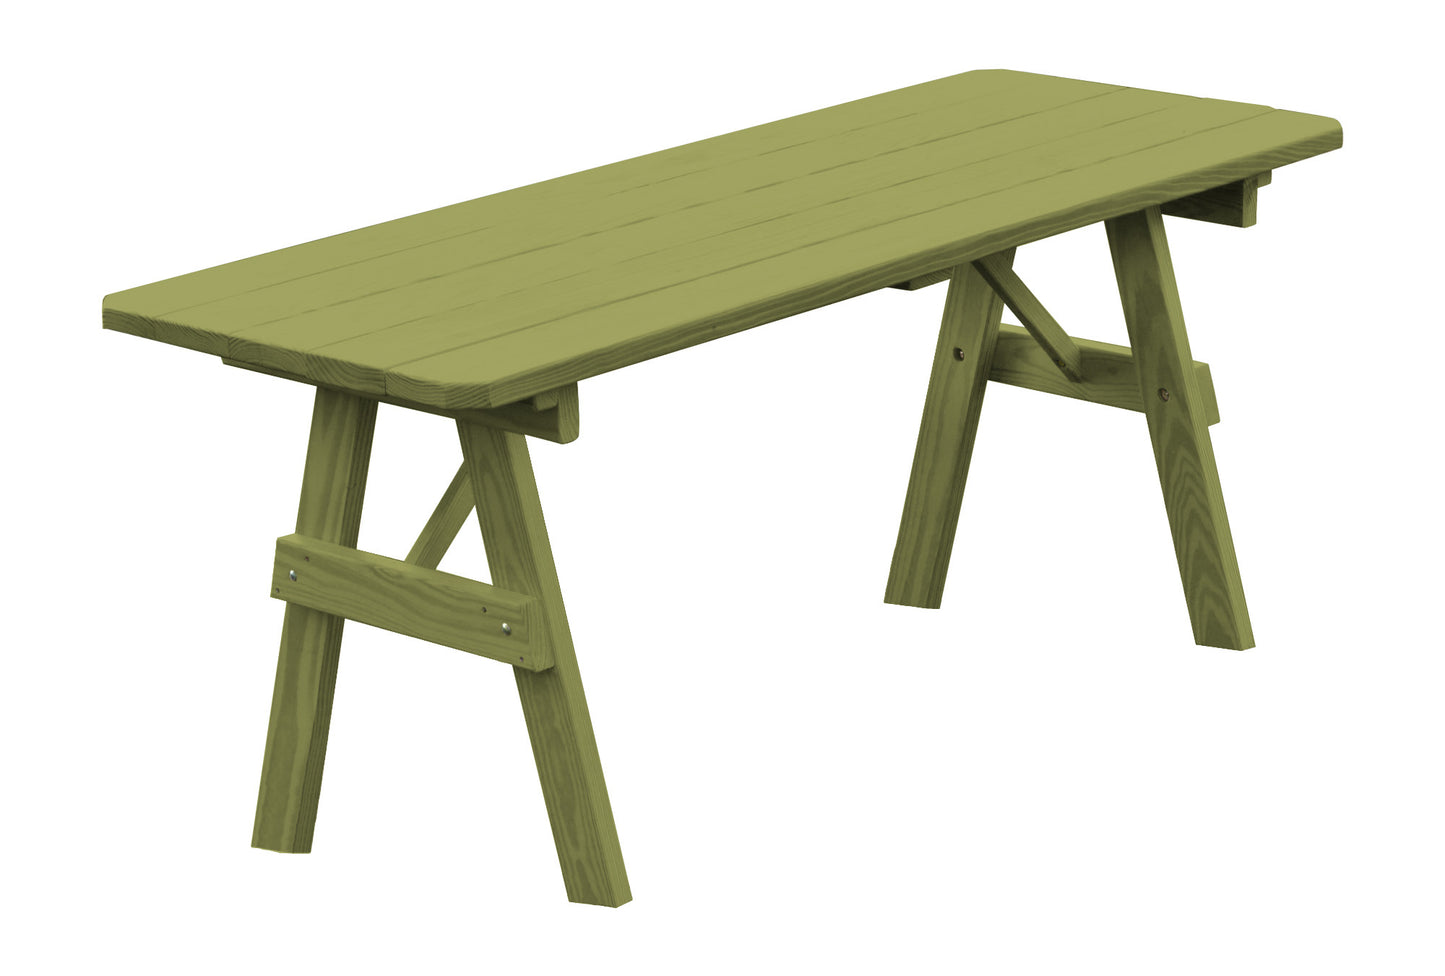 A&L Furniture Co. Yellow Pine 8' Traditional Table Only - Umbrella Hole - LEAD TIME TO SHIP 10 BUSINESS DAYS